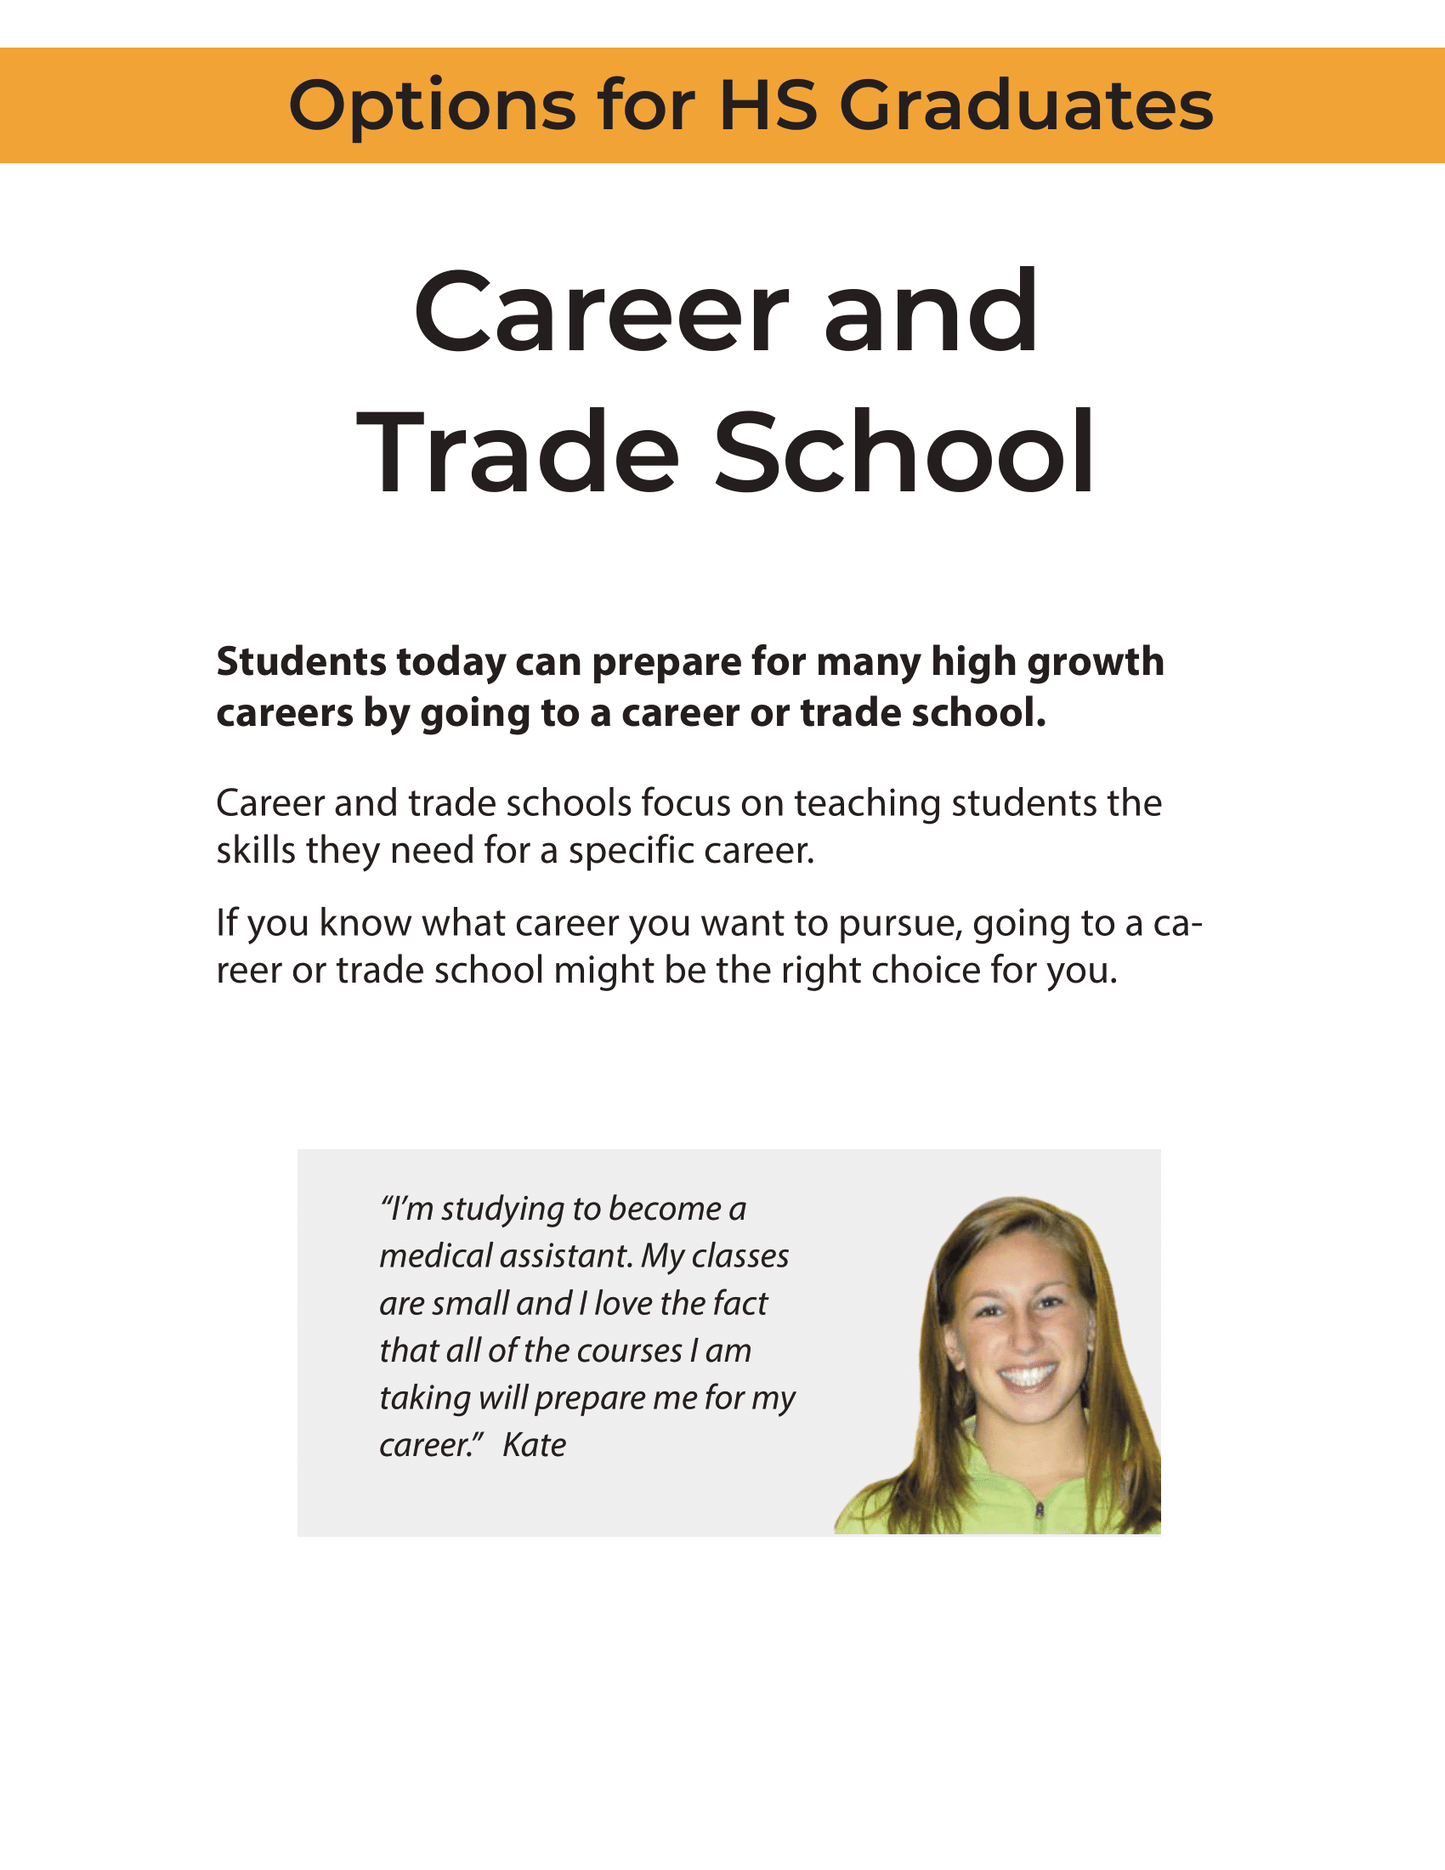 Options for HS Graduates - Career and Trade School